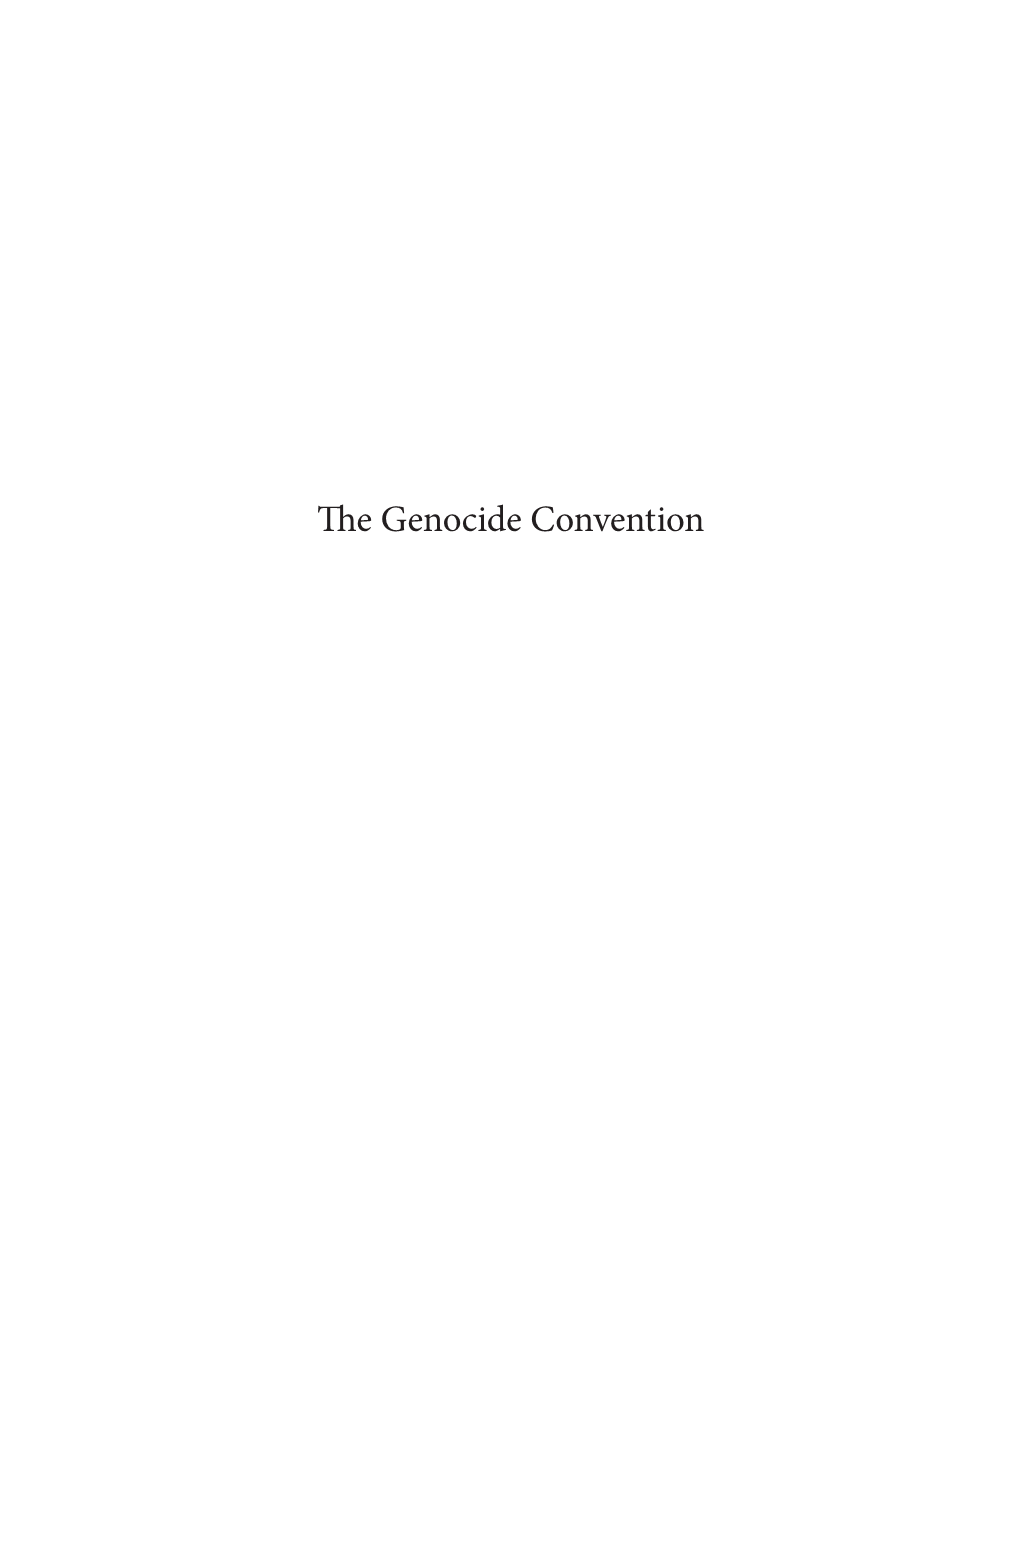 The Genocide Convention of 1948